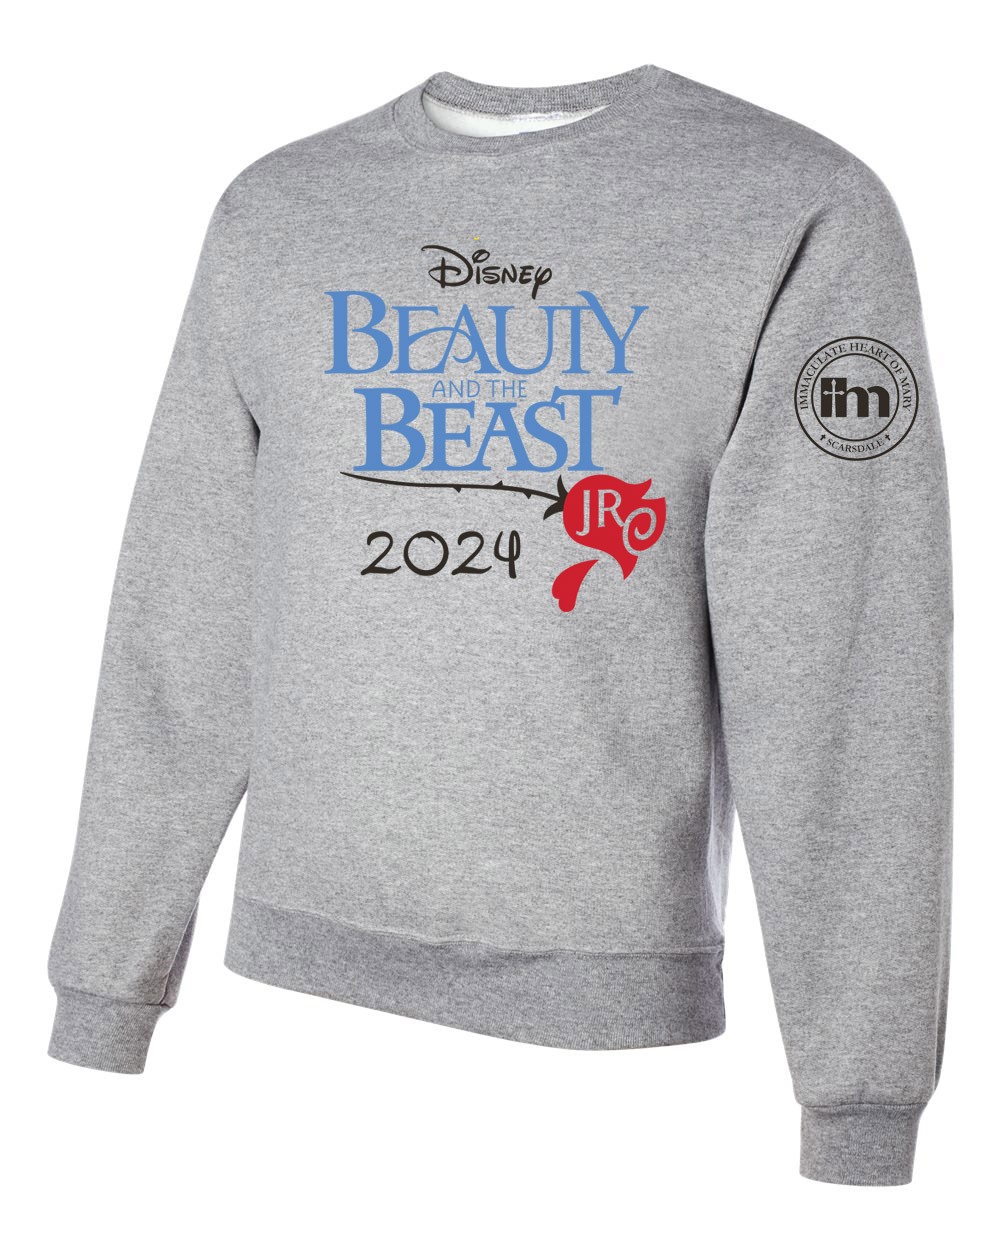 IHM Beauty and the Beast Sweatshirt w/ Logo - Please Allow 2-3 Weeks for Delivery